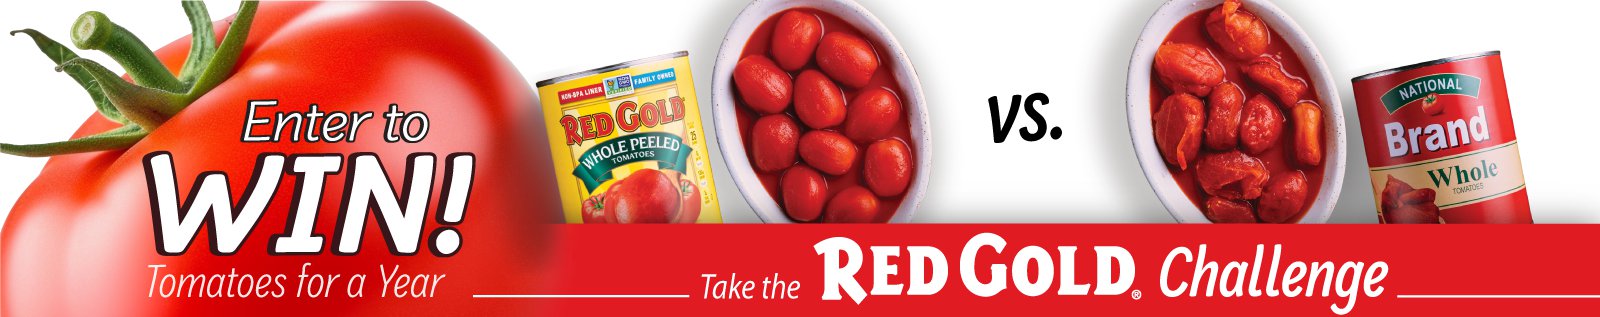 Take the Red Gold Challenge for your chance to win tomatoes for a year!